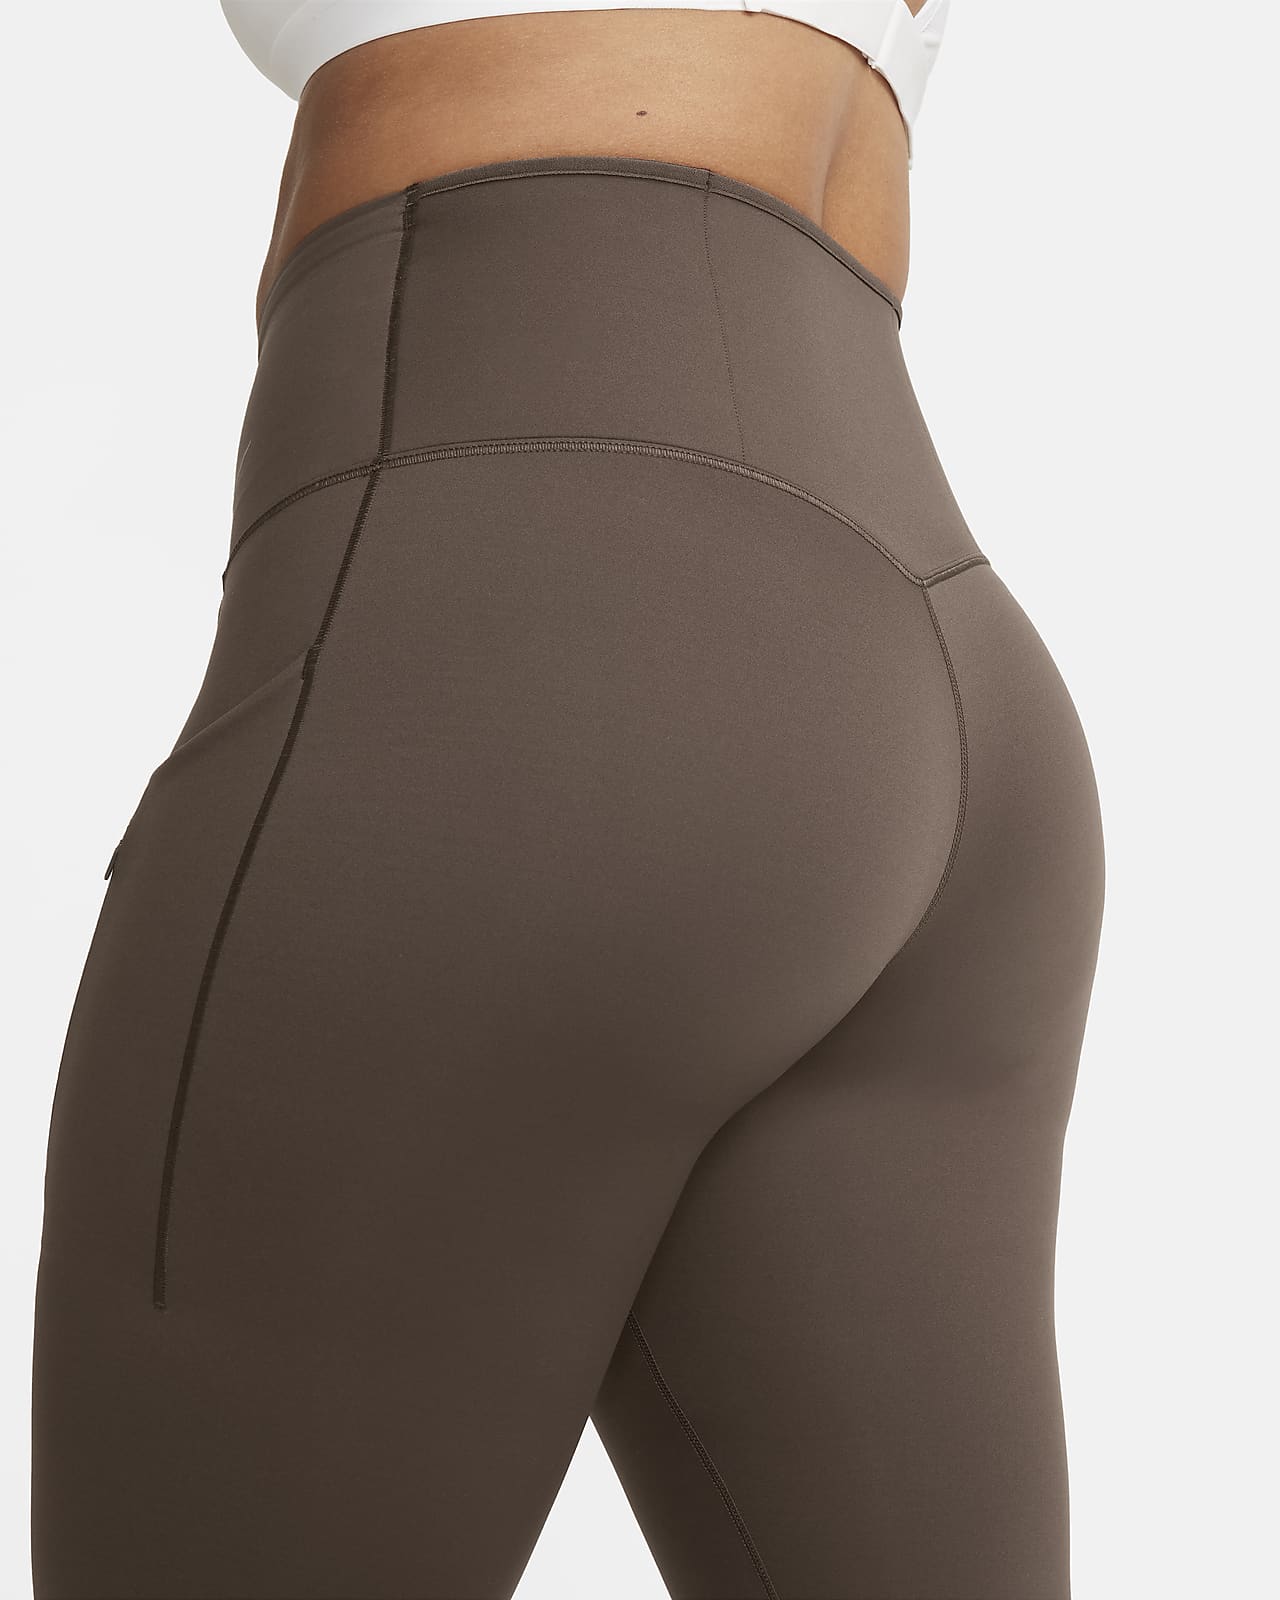 Brown Recycled Polyester Tights & Leggings. Nike CA